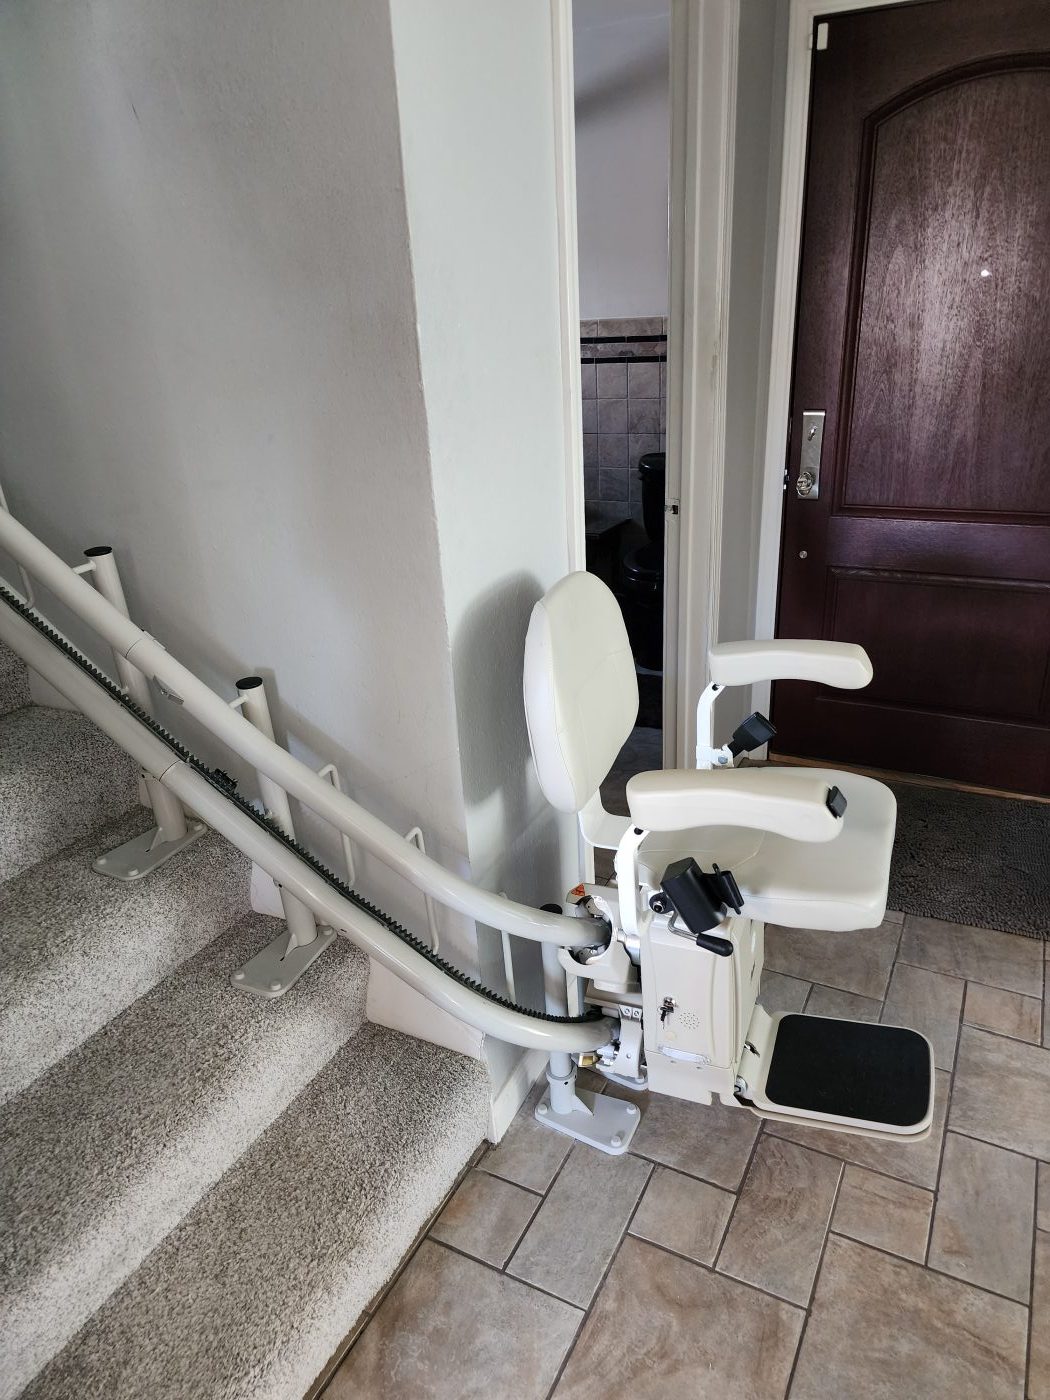 The Pilot Navigator E604 Curved Stairlift